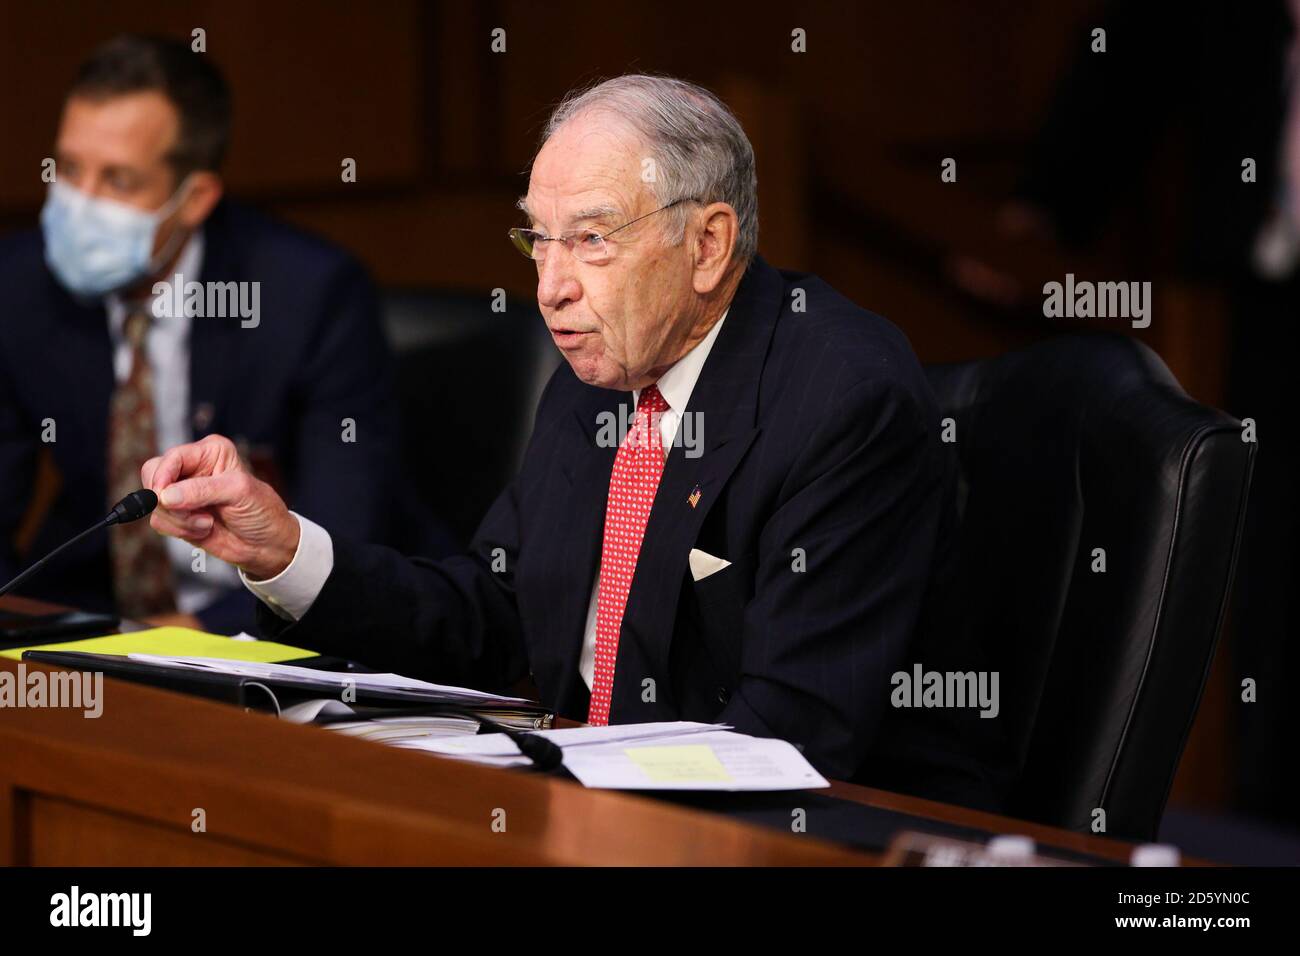 United States Senator Chuck Grassley (Republican of Iowa) questions President Donald Trump's Supreme Court nominee Judge Amy Coney Barrett during the third day of her Senate Judiciary Committee confirmation hearing Wednesday, October 14, 2020. Credit: Bonnie Cash/Pool via CNP /MediaPunch Stock Photo